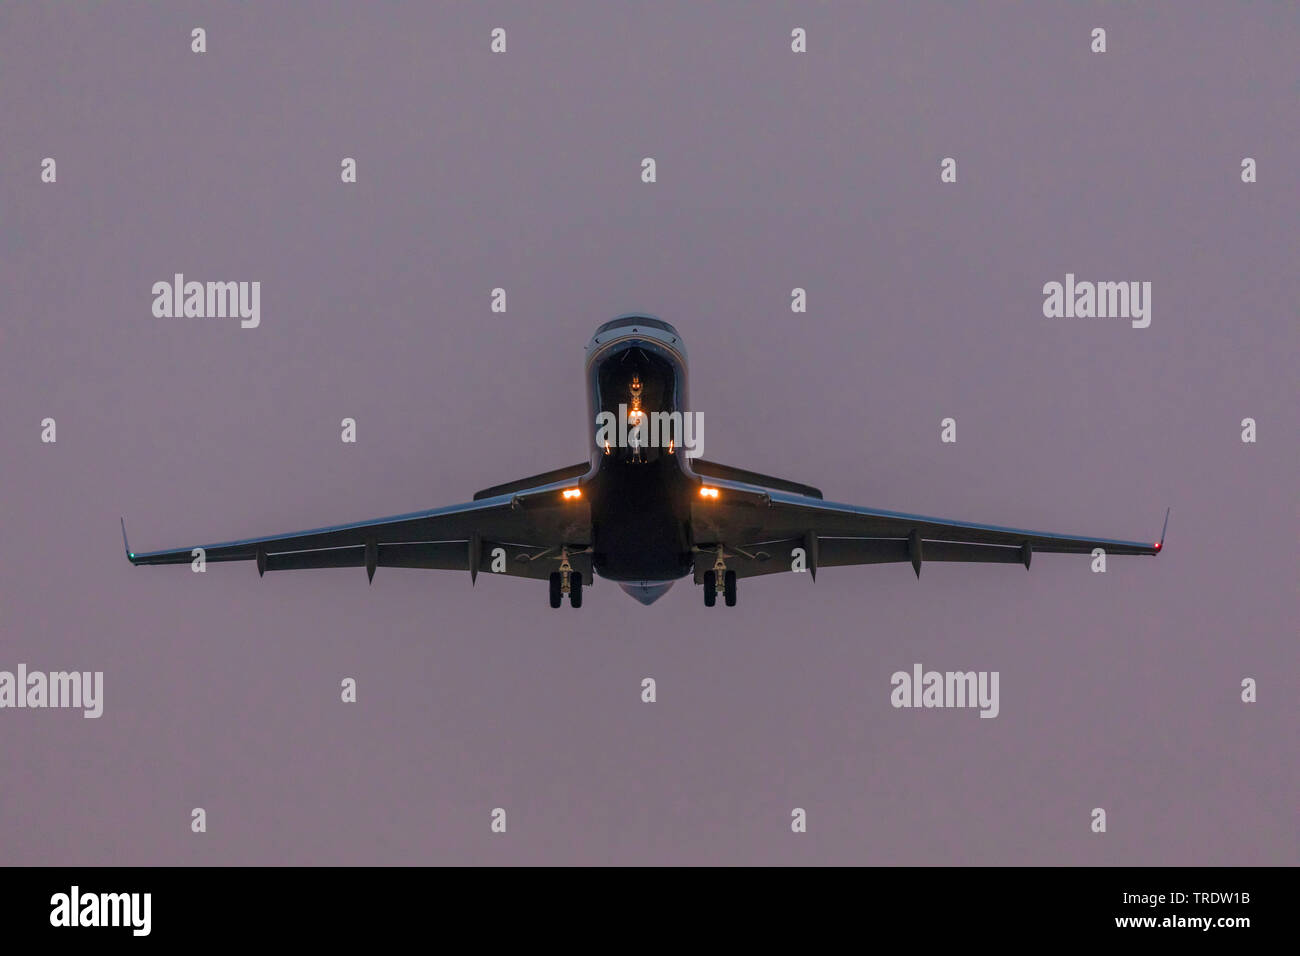 Bombardier CR900 landing in the evening, Germany, Bavaria, Flughafen Muenchen Stock Photo